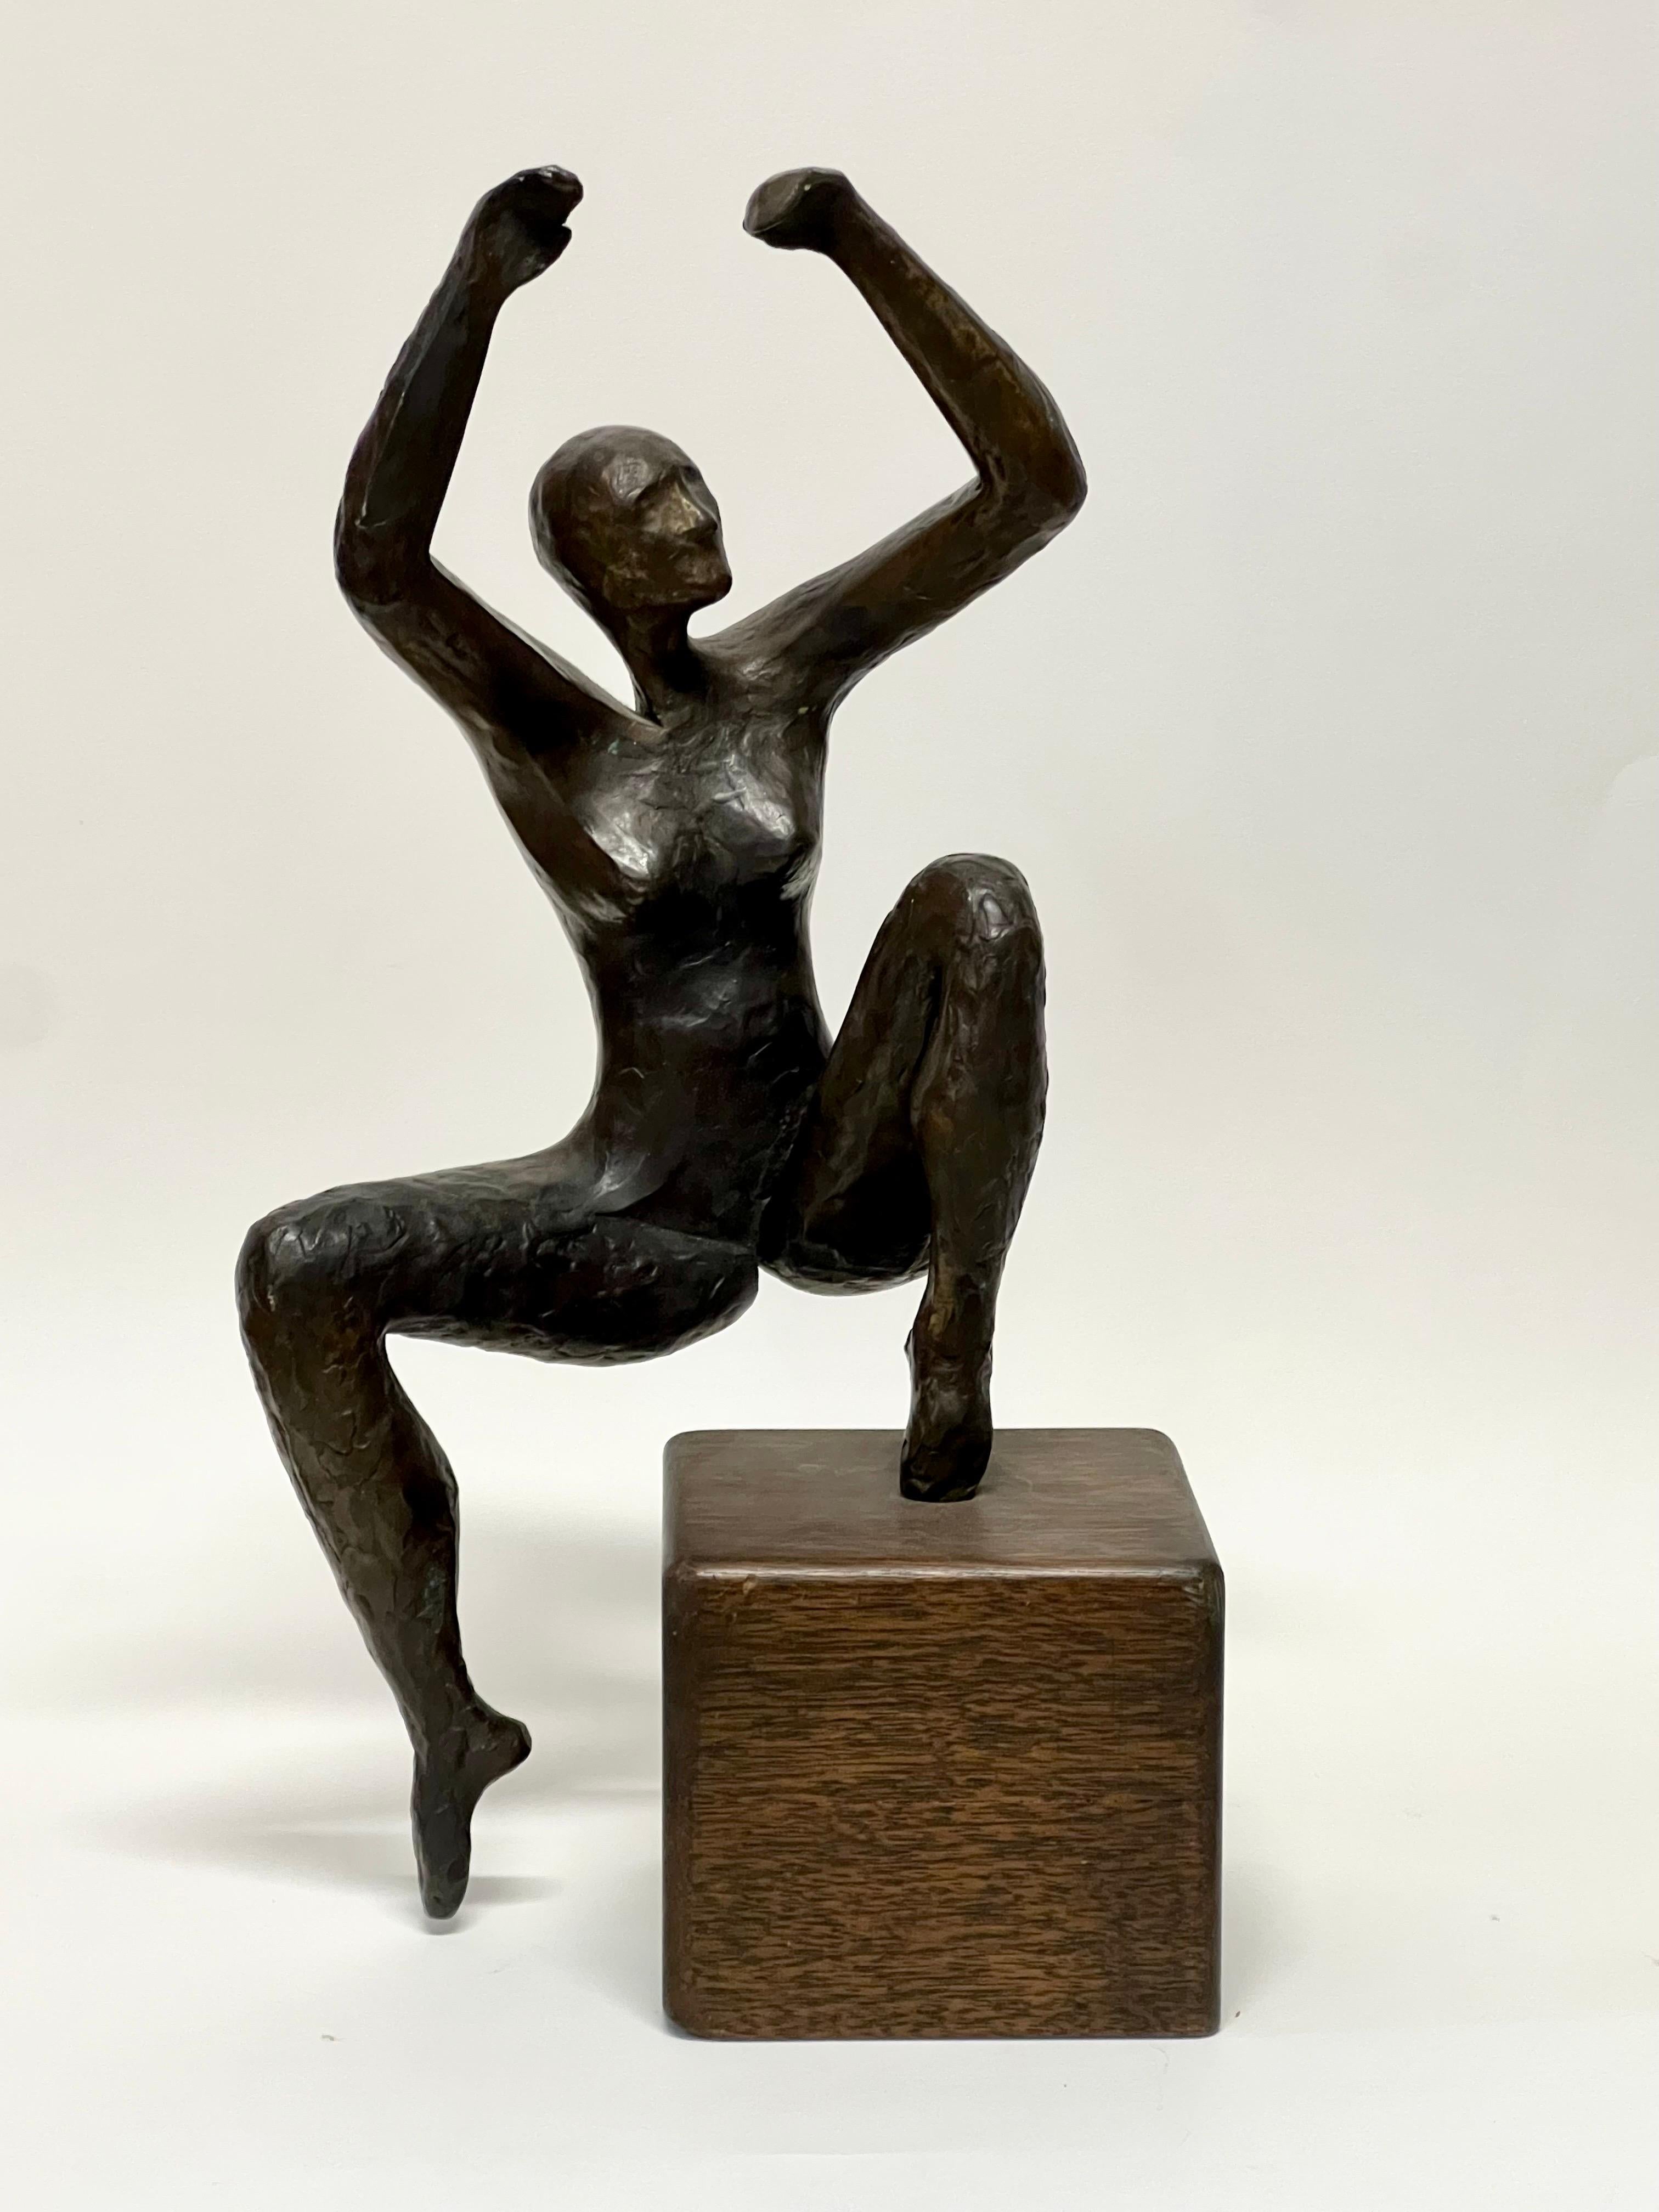 Stunning modernist female fugitive abstract cast bronze sculpture delicately balancing on a wood cube base. Amazing modern features, definitely made by a very skilled artist. Piece is signed, but artist is unknown. Edition of 15. 